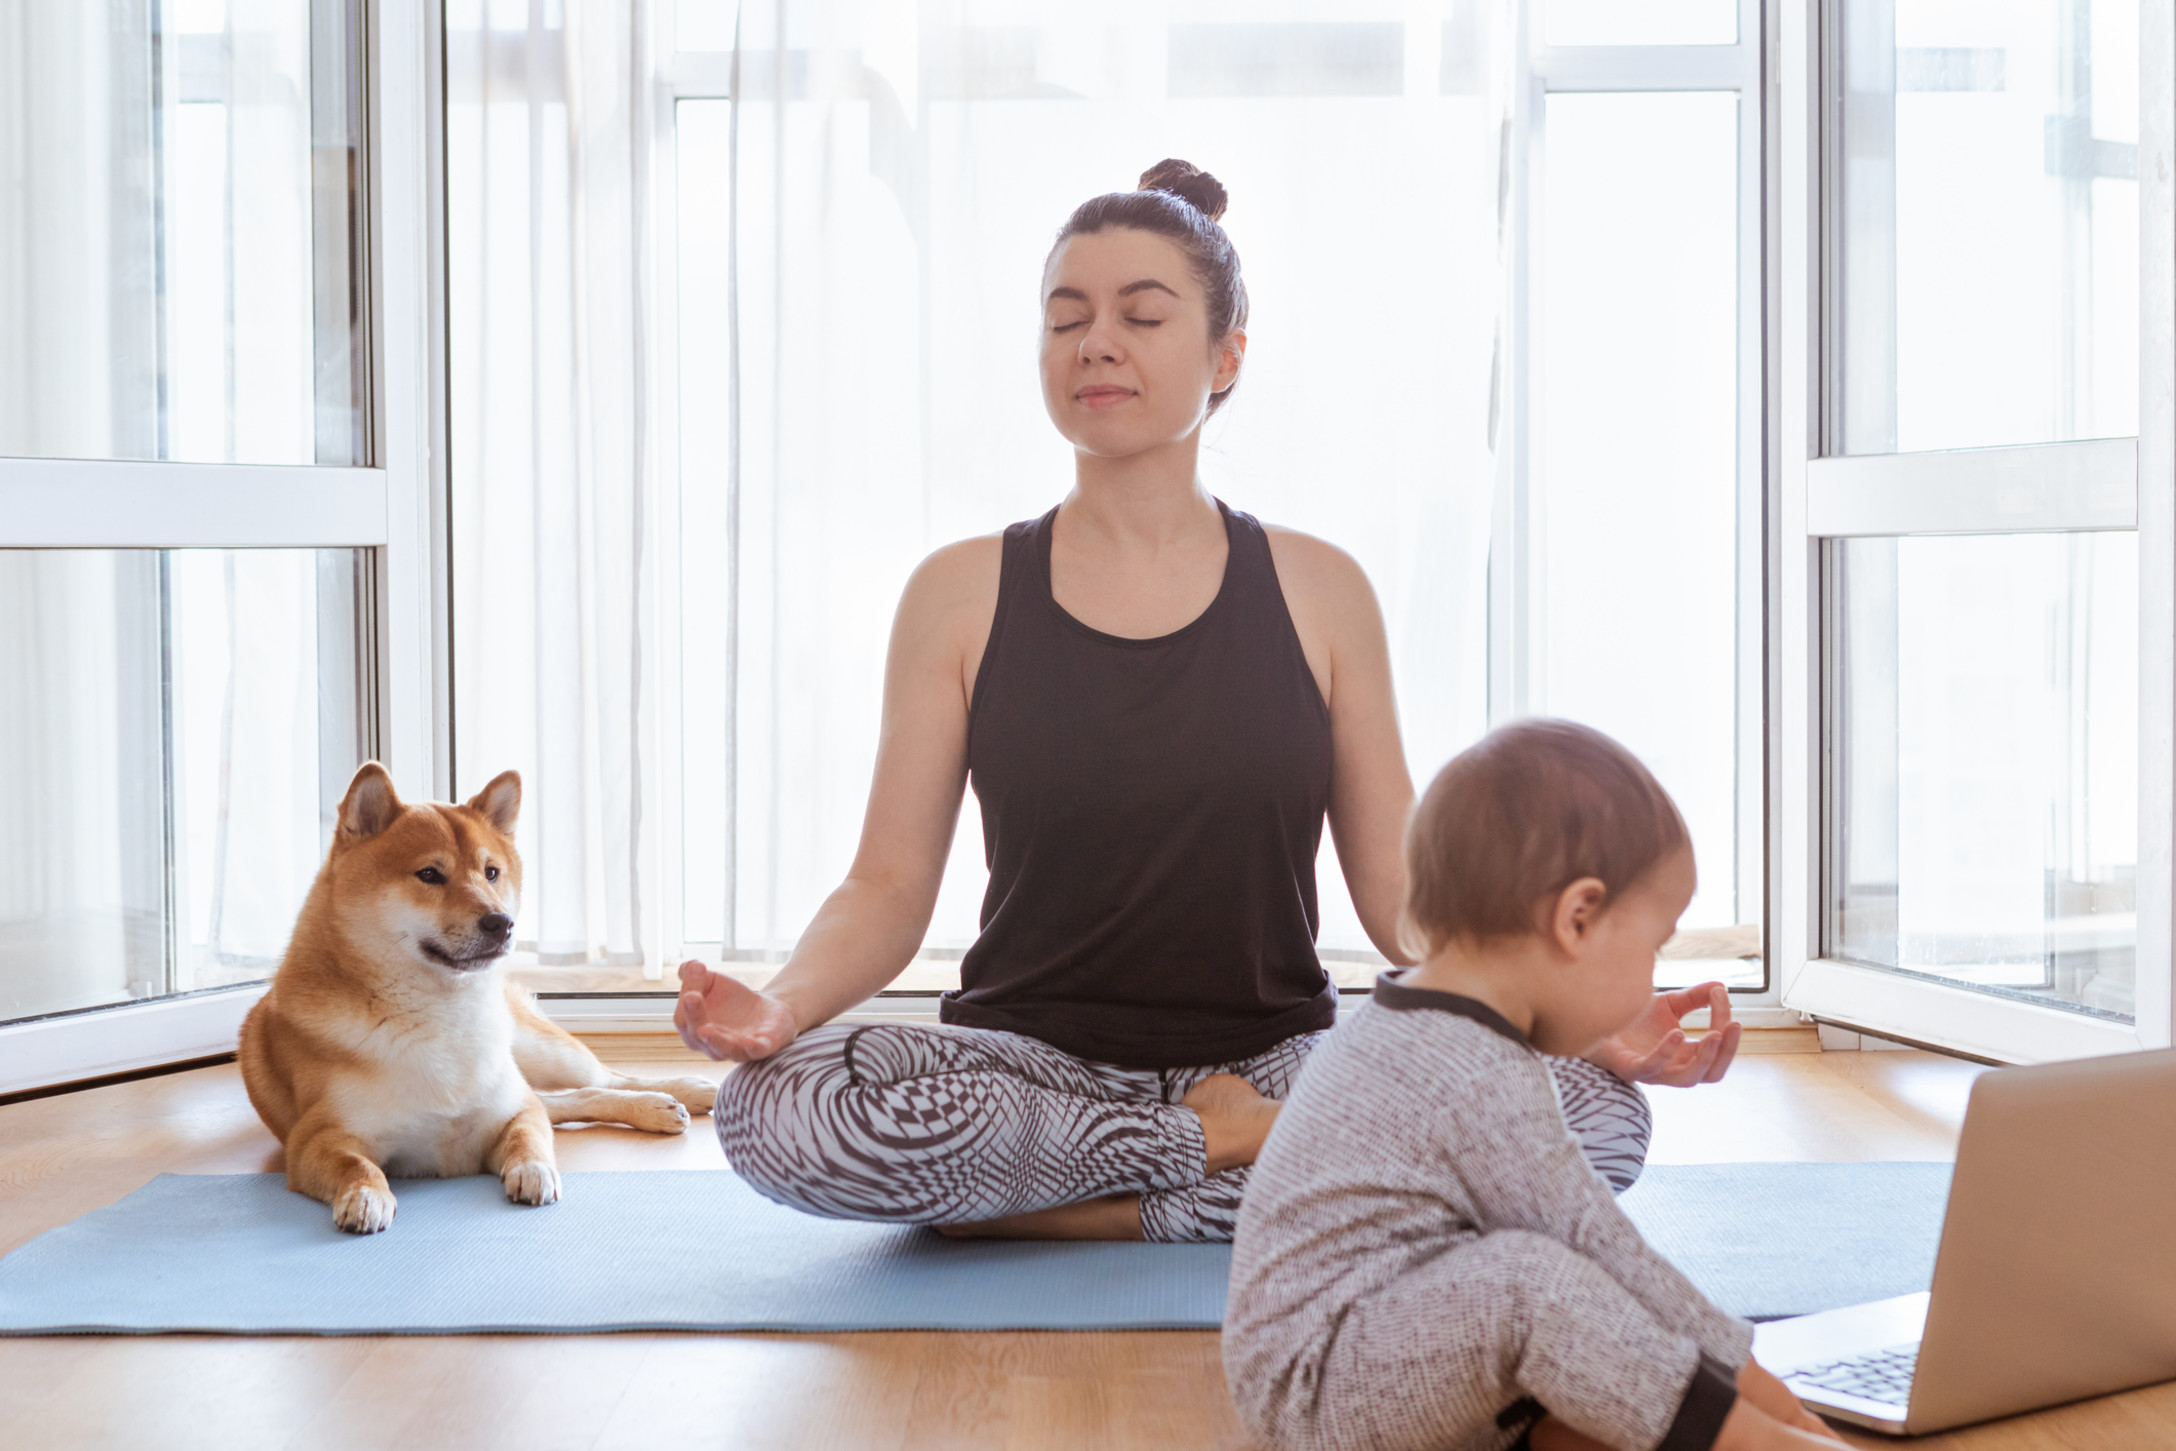 Julia's Top 10 Essentials for Your Home Yoga Practice